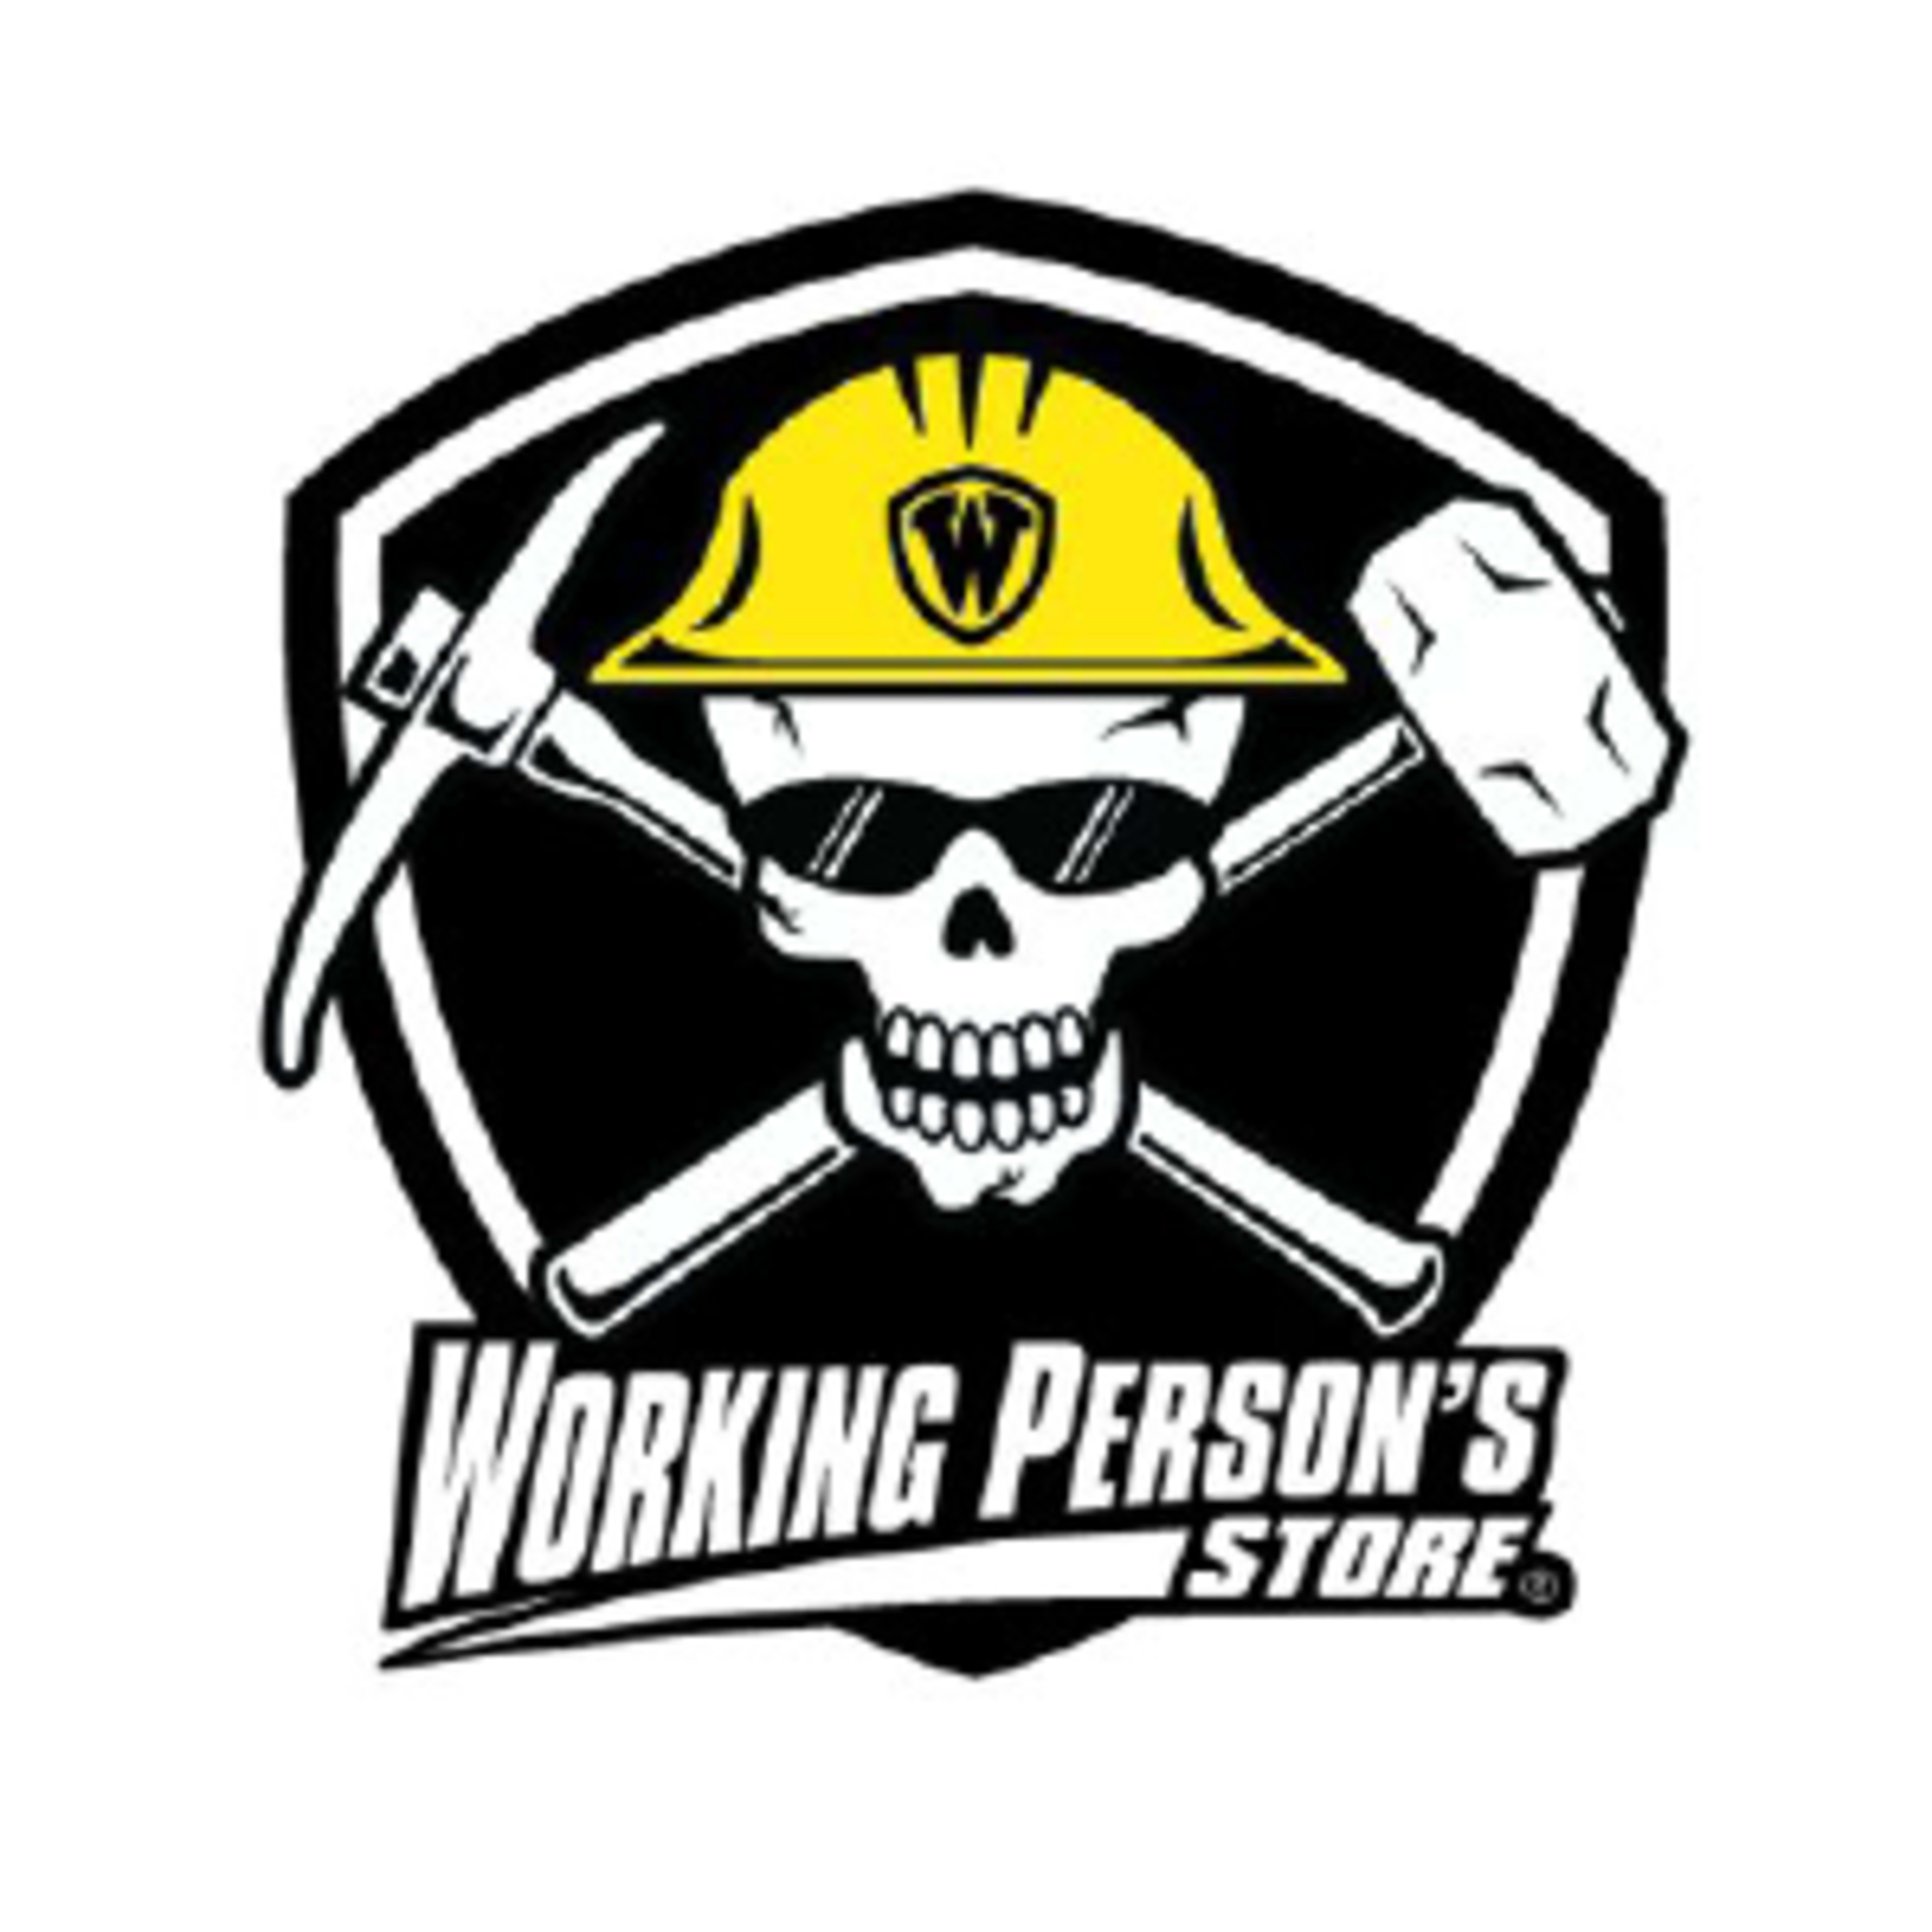 Working Person's Store Code